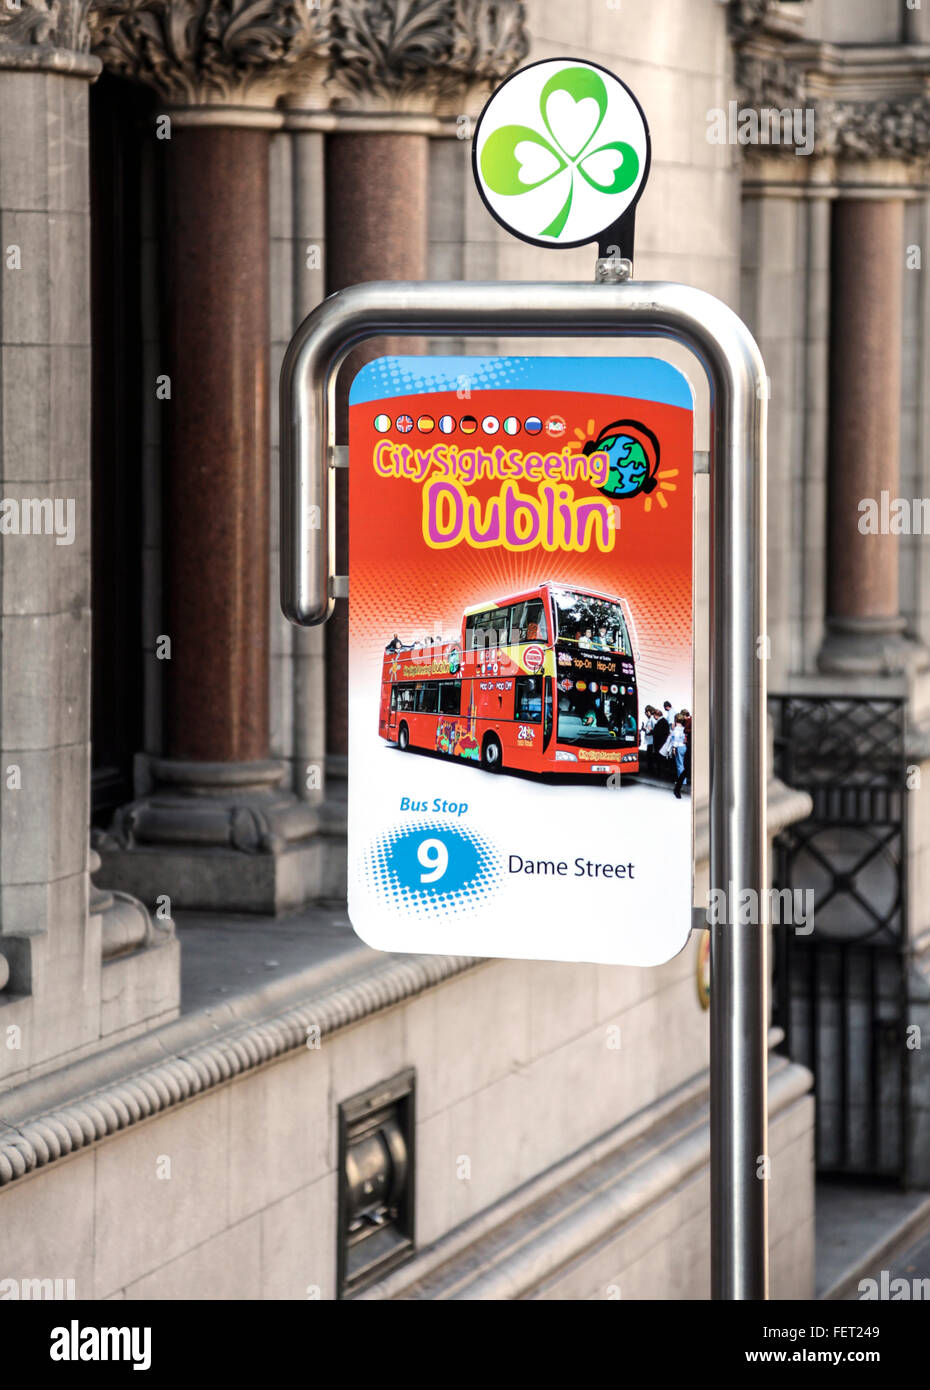 Bus stop No 9 (Dame Street) for the CitySightseeing tour bus in Dublin, Republic of Ireland. Stock Photo